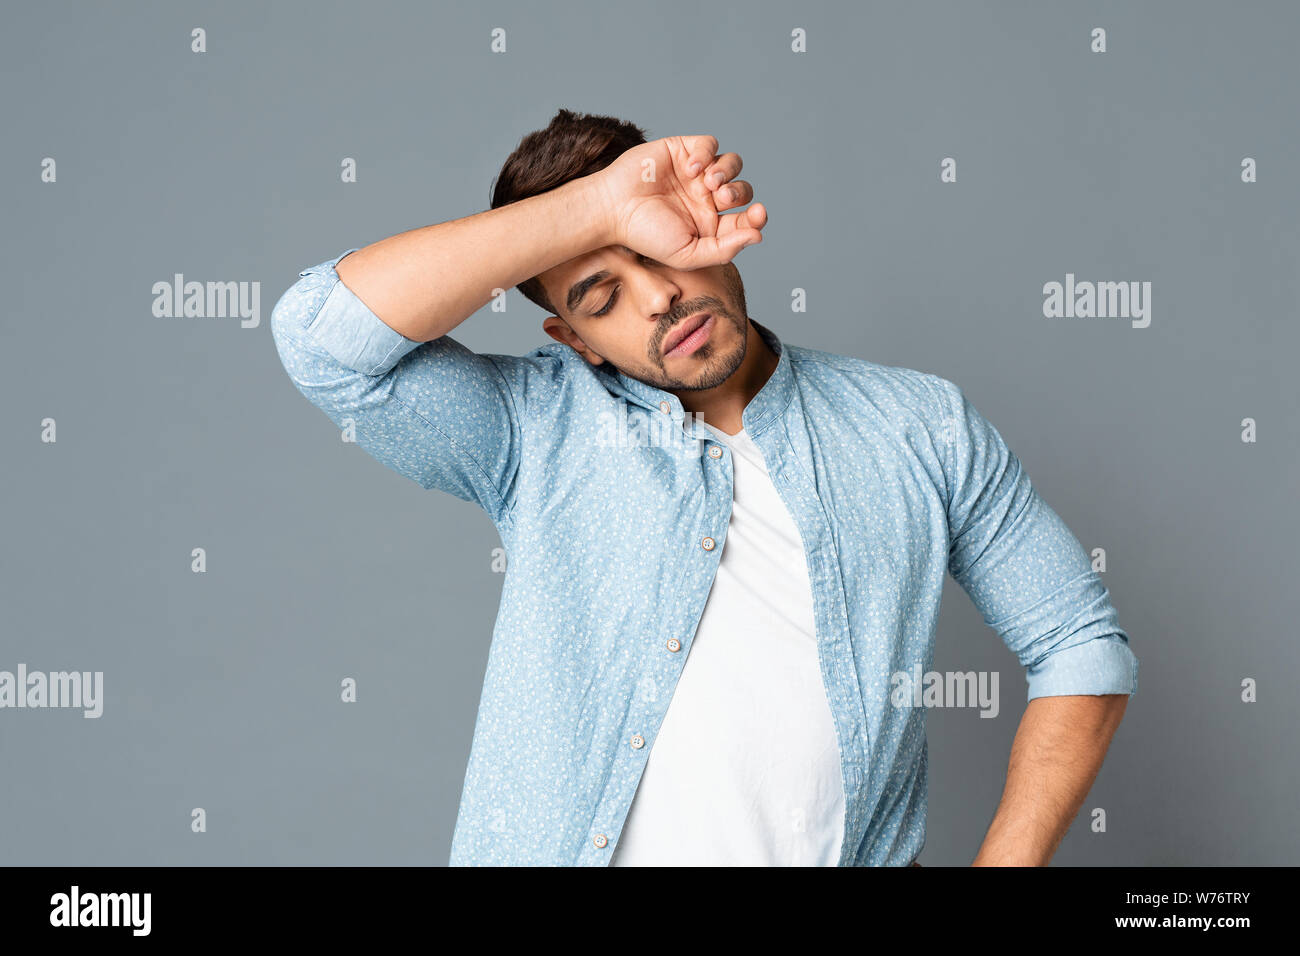 Exhausted hispanic man wiping sweat off forehead on gray background Stock Photo